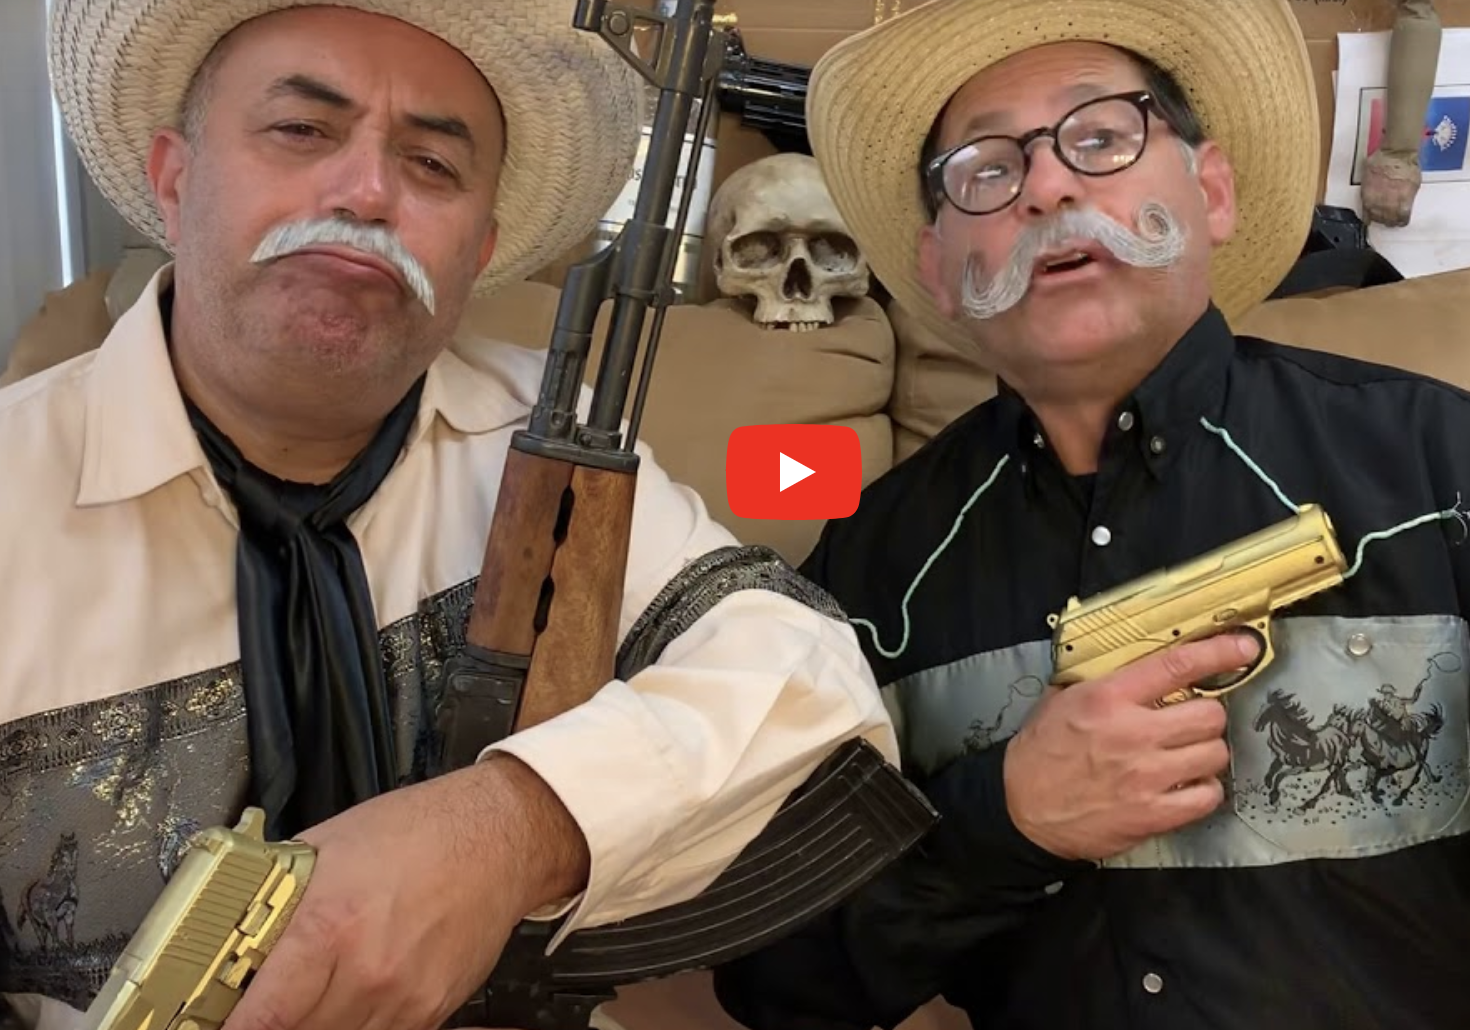 The bad hombres of our world premiere comedy by Herbert Siguenza